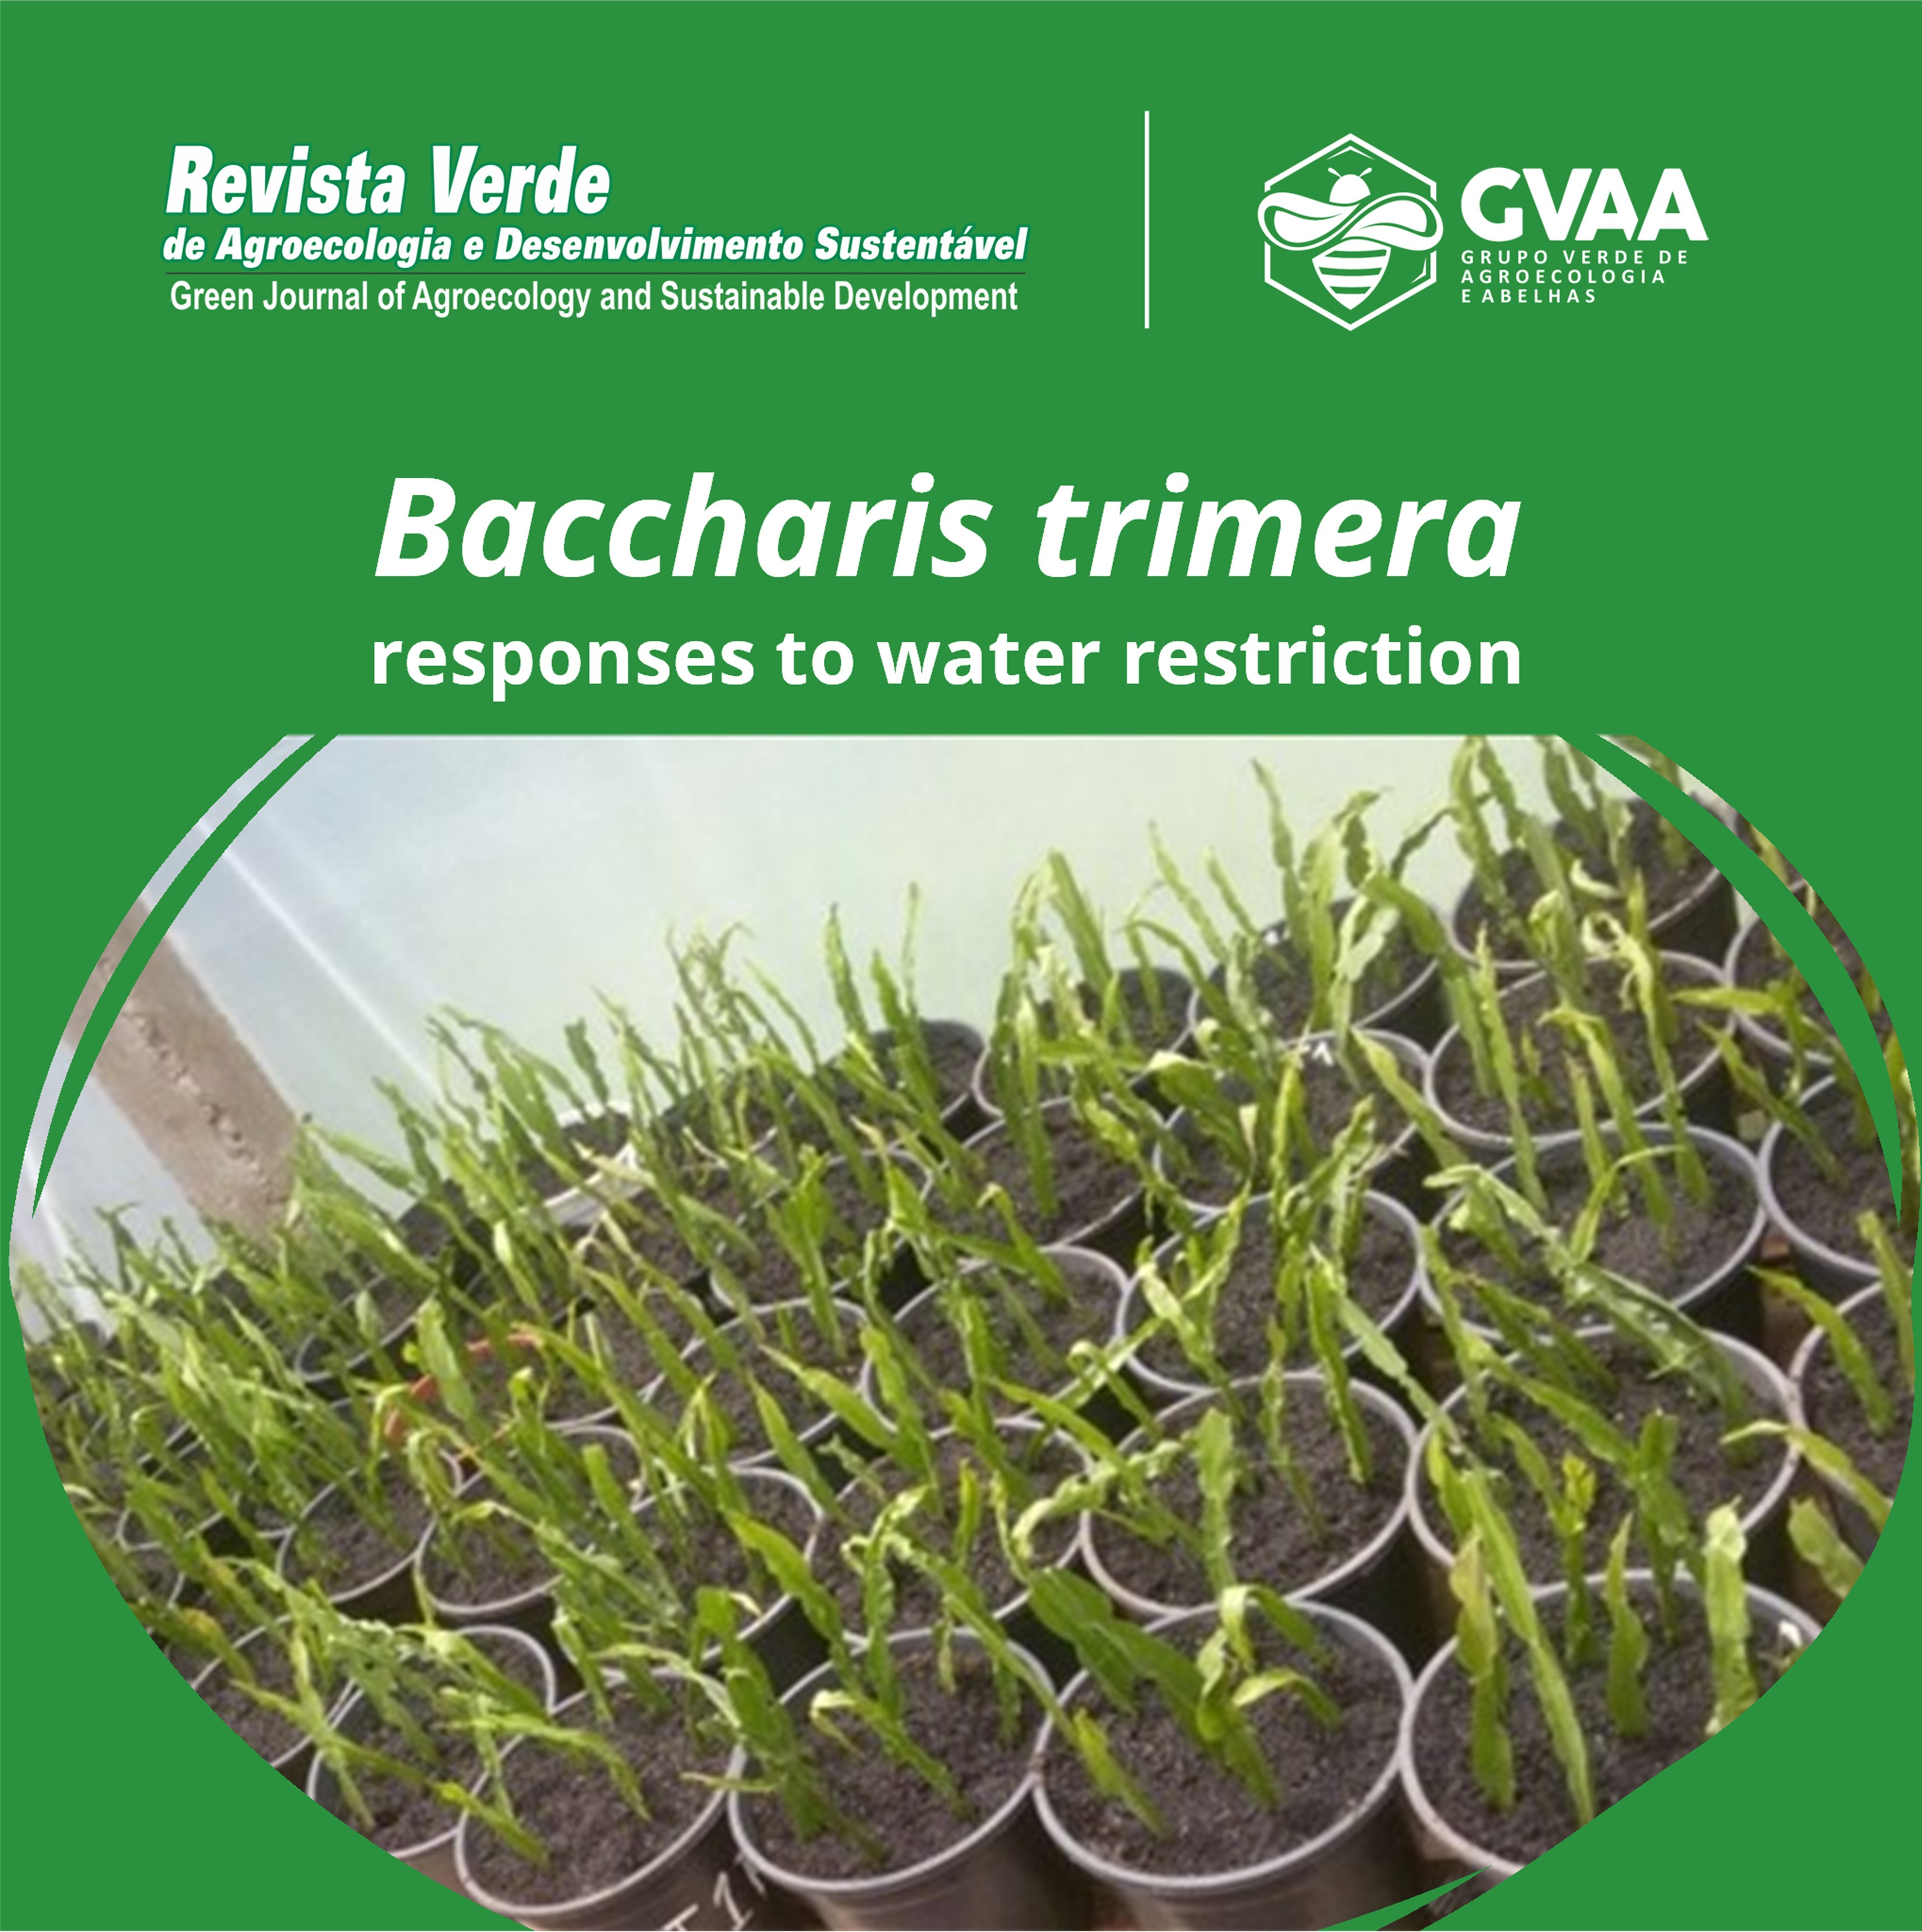 Baccharis trimera (Less.) DC responses to water restriction